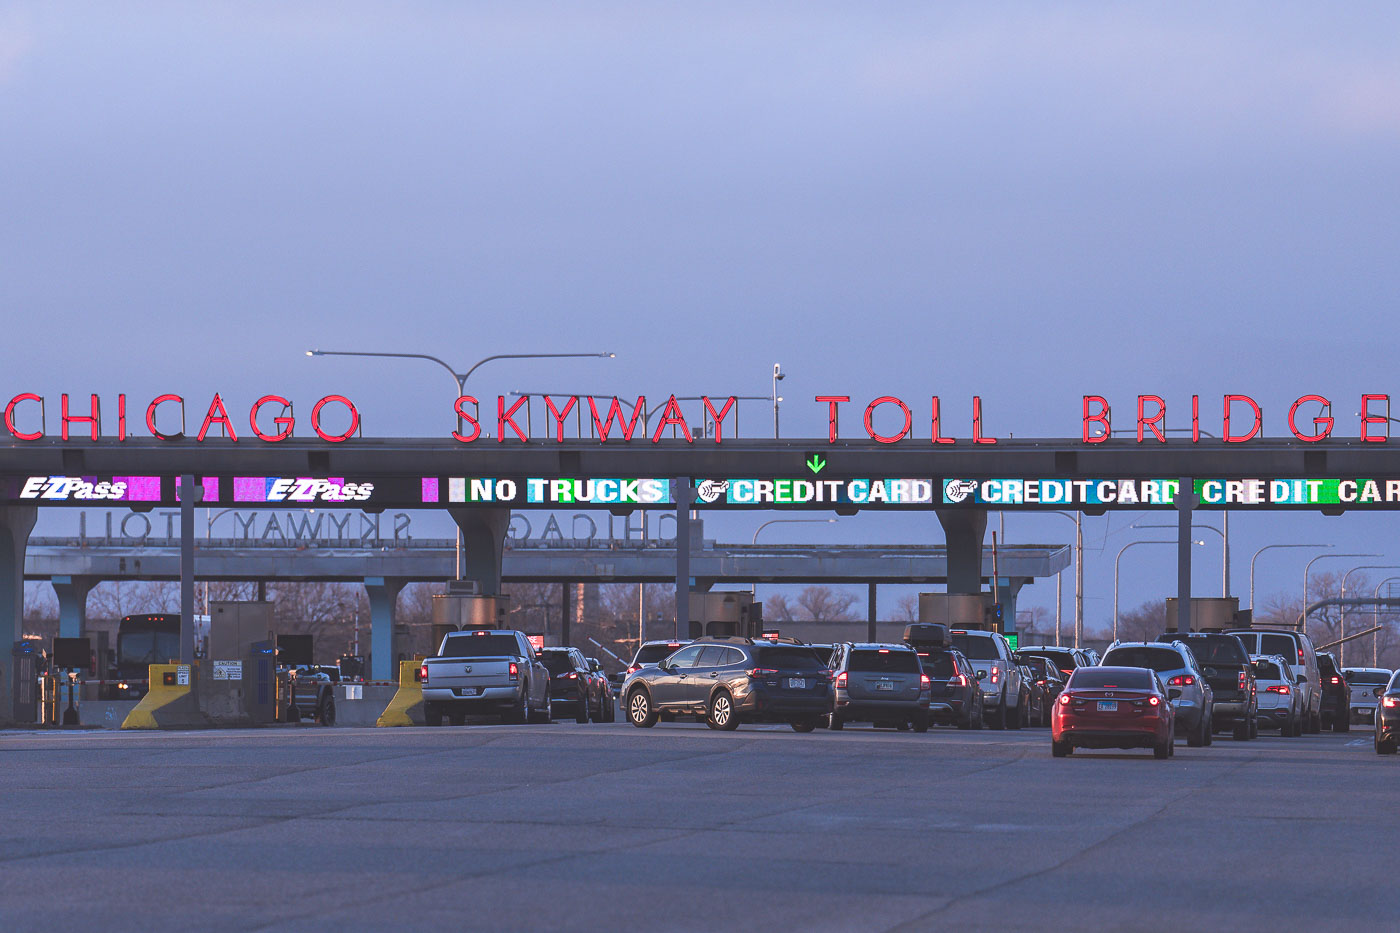 Chicago Skyway Toll Bridge sign lit up red